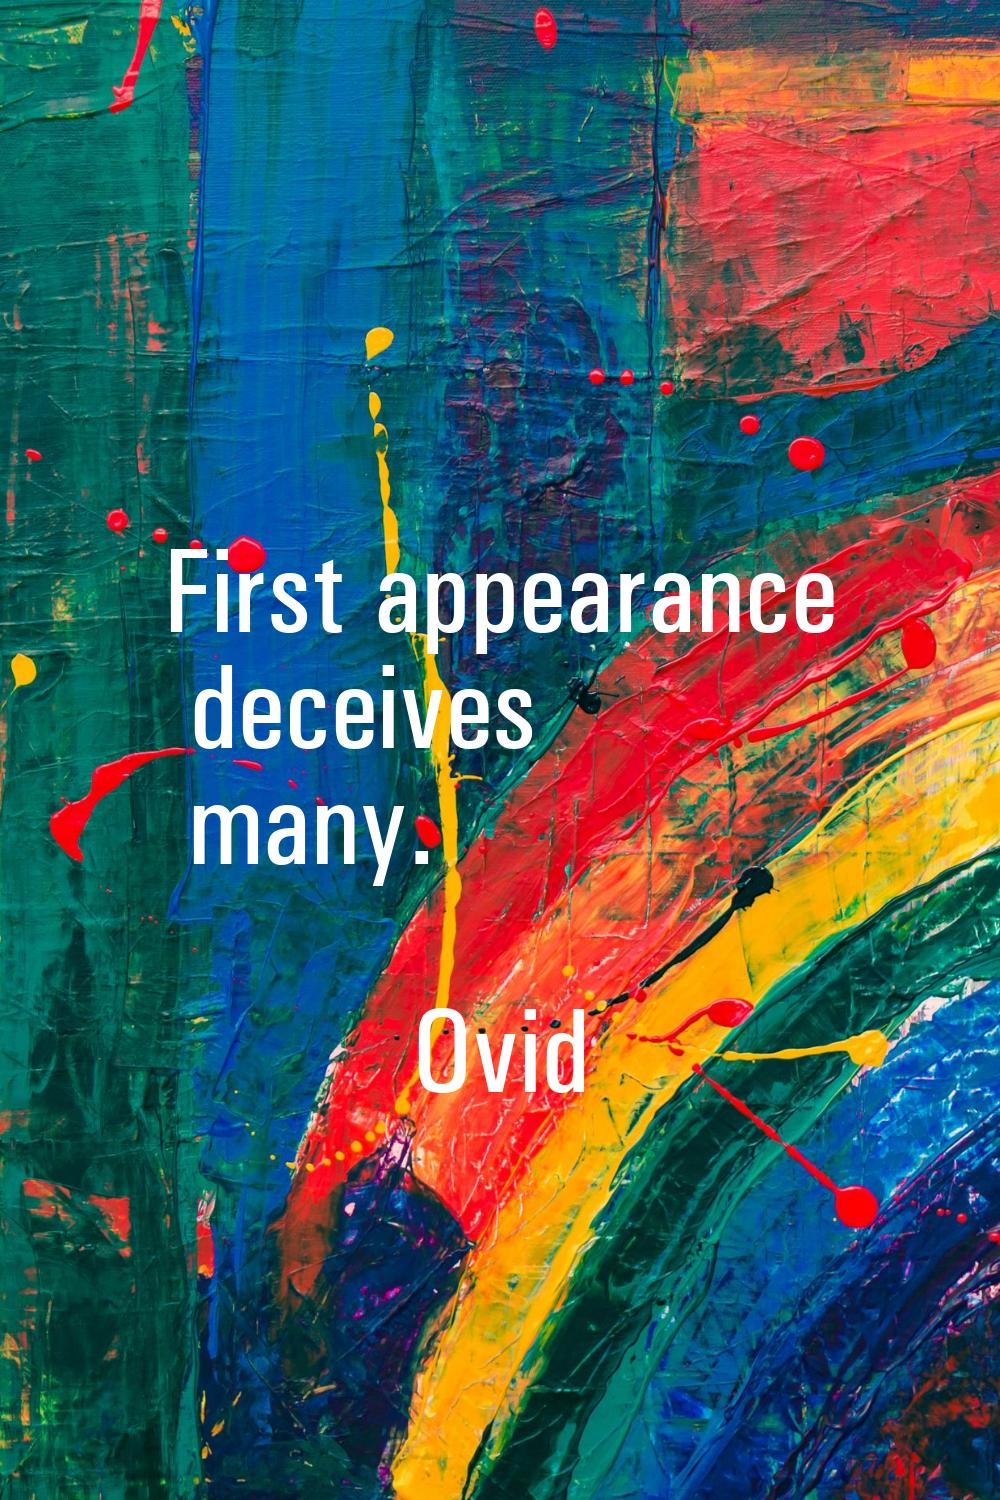 First appearance deceives many.